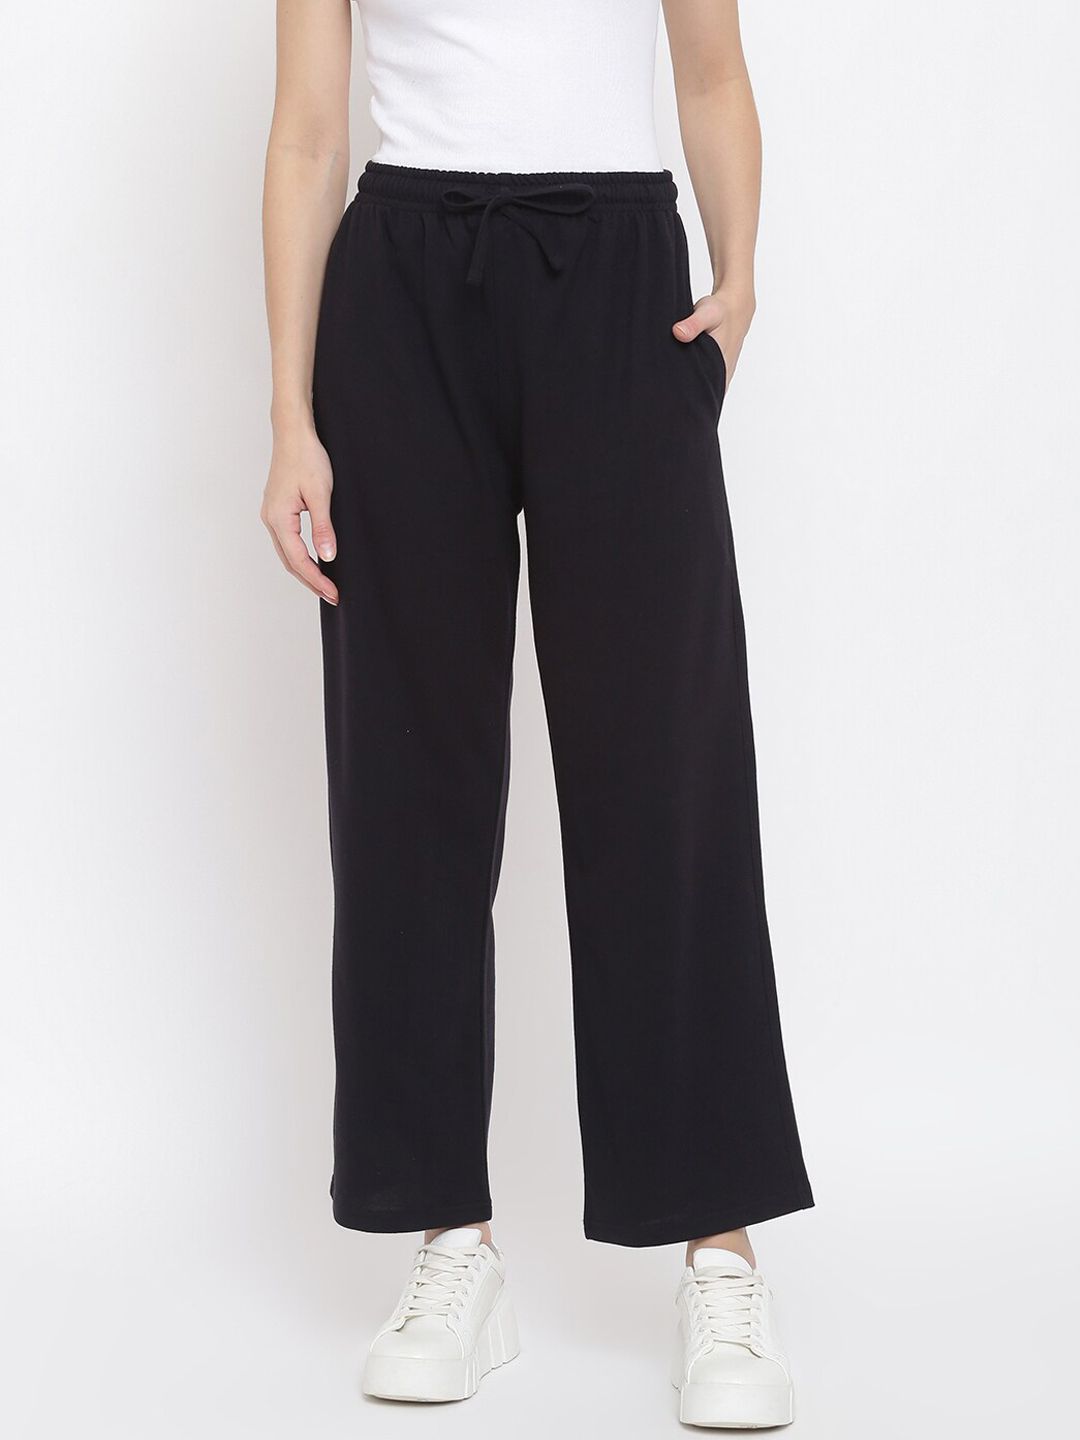 MKH Women Black Regular Fit Solid Wide-Leg Track Pants Price in India